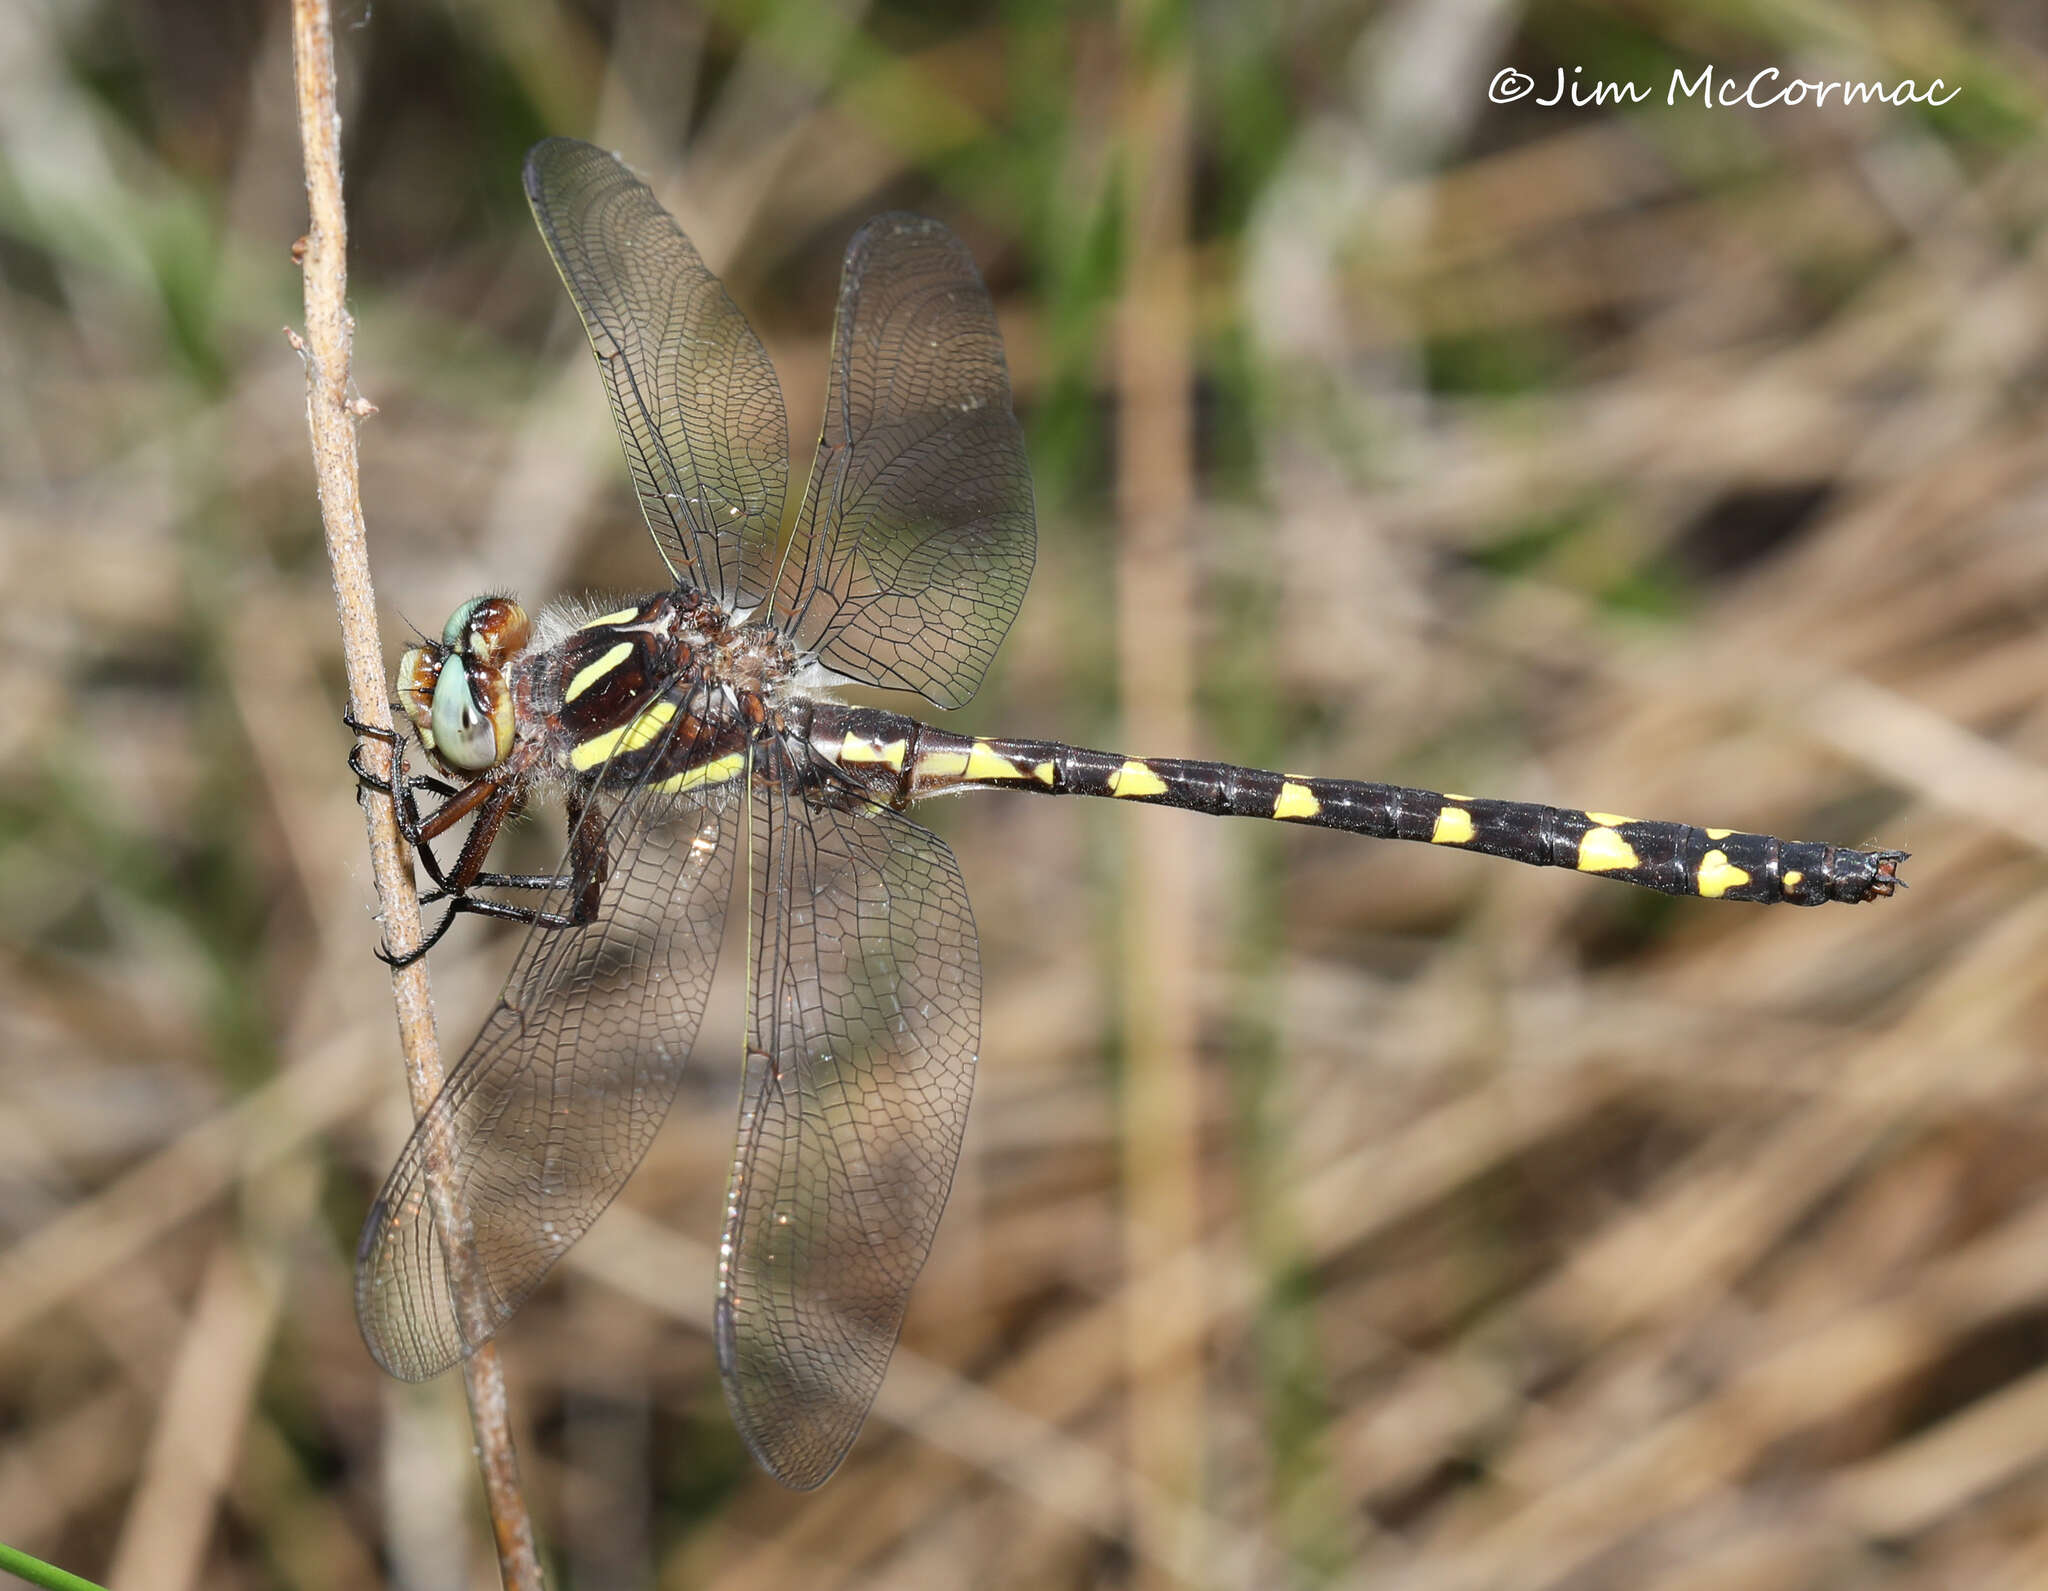 Image of Brown Spiketail